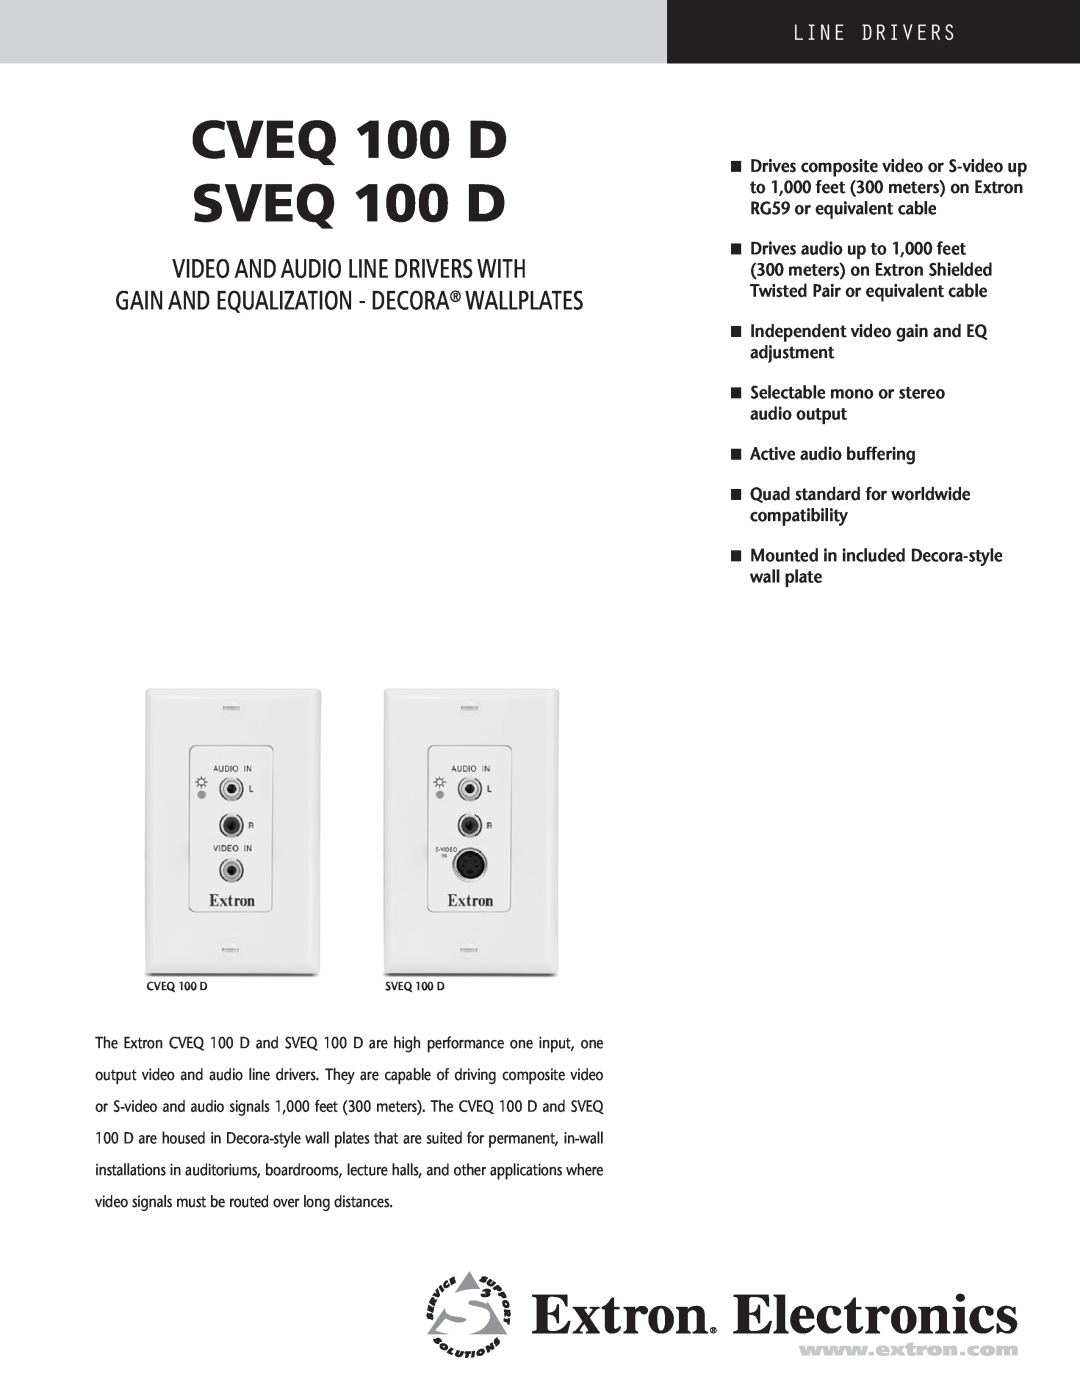 Extron electronic CVEQ 100 D manual video and audio line drivers with, gain and equalization - Decora wallplates 